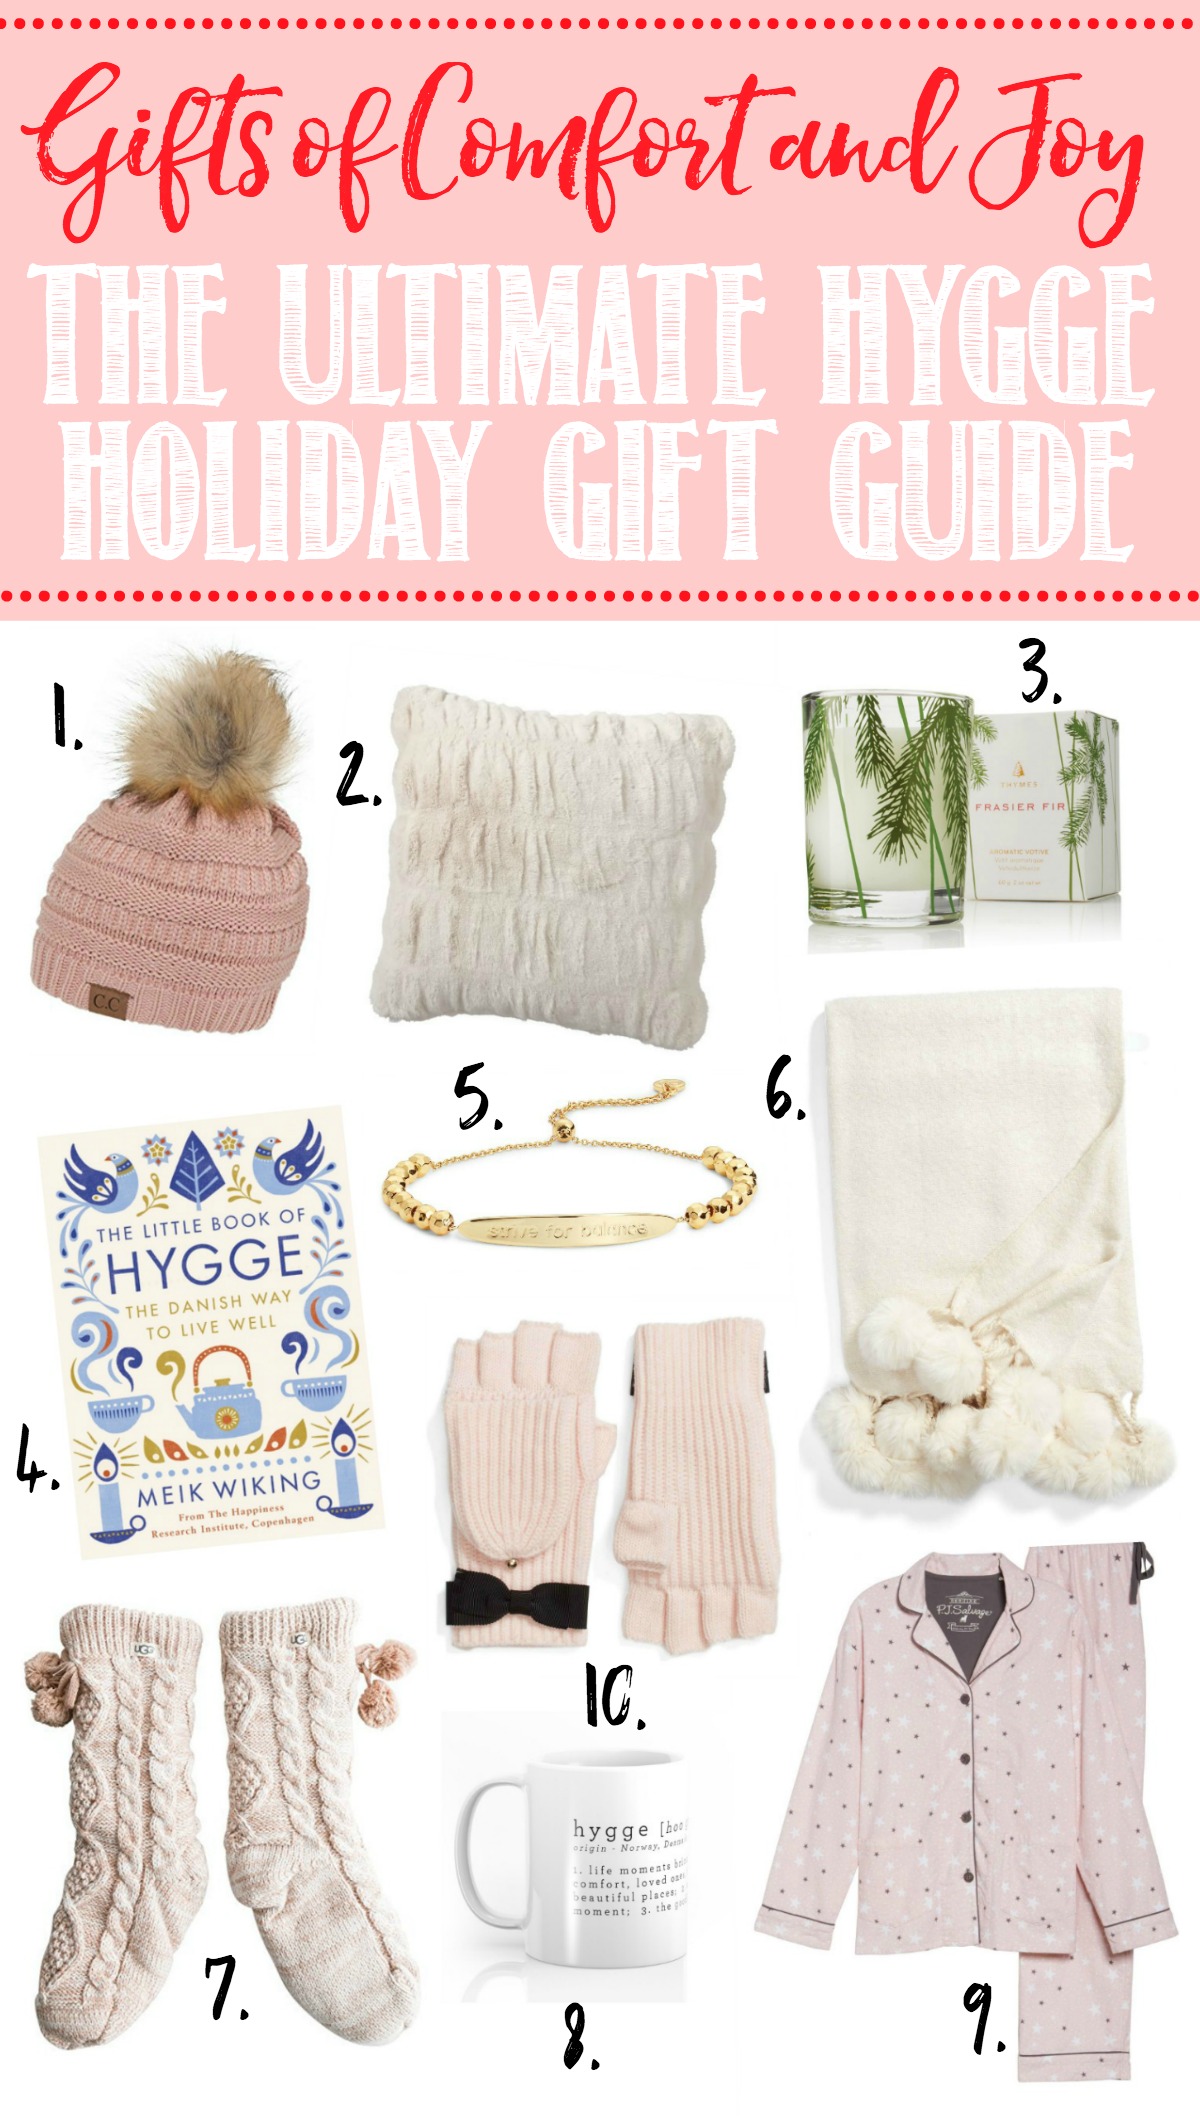 Awesome Christmas gift guides to add some hygge to your winter! I'd love all of these!!